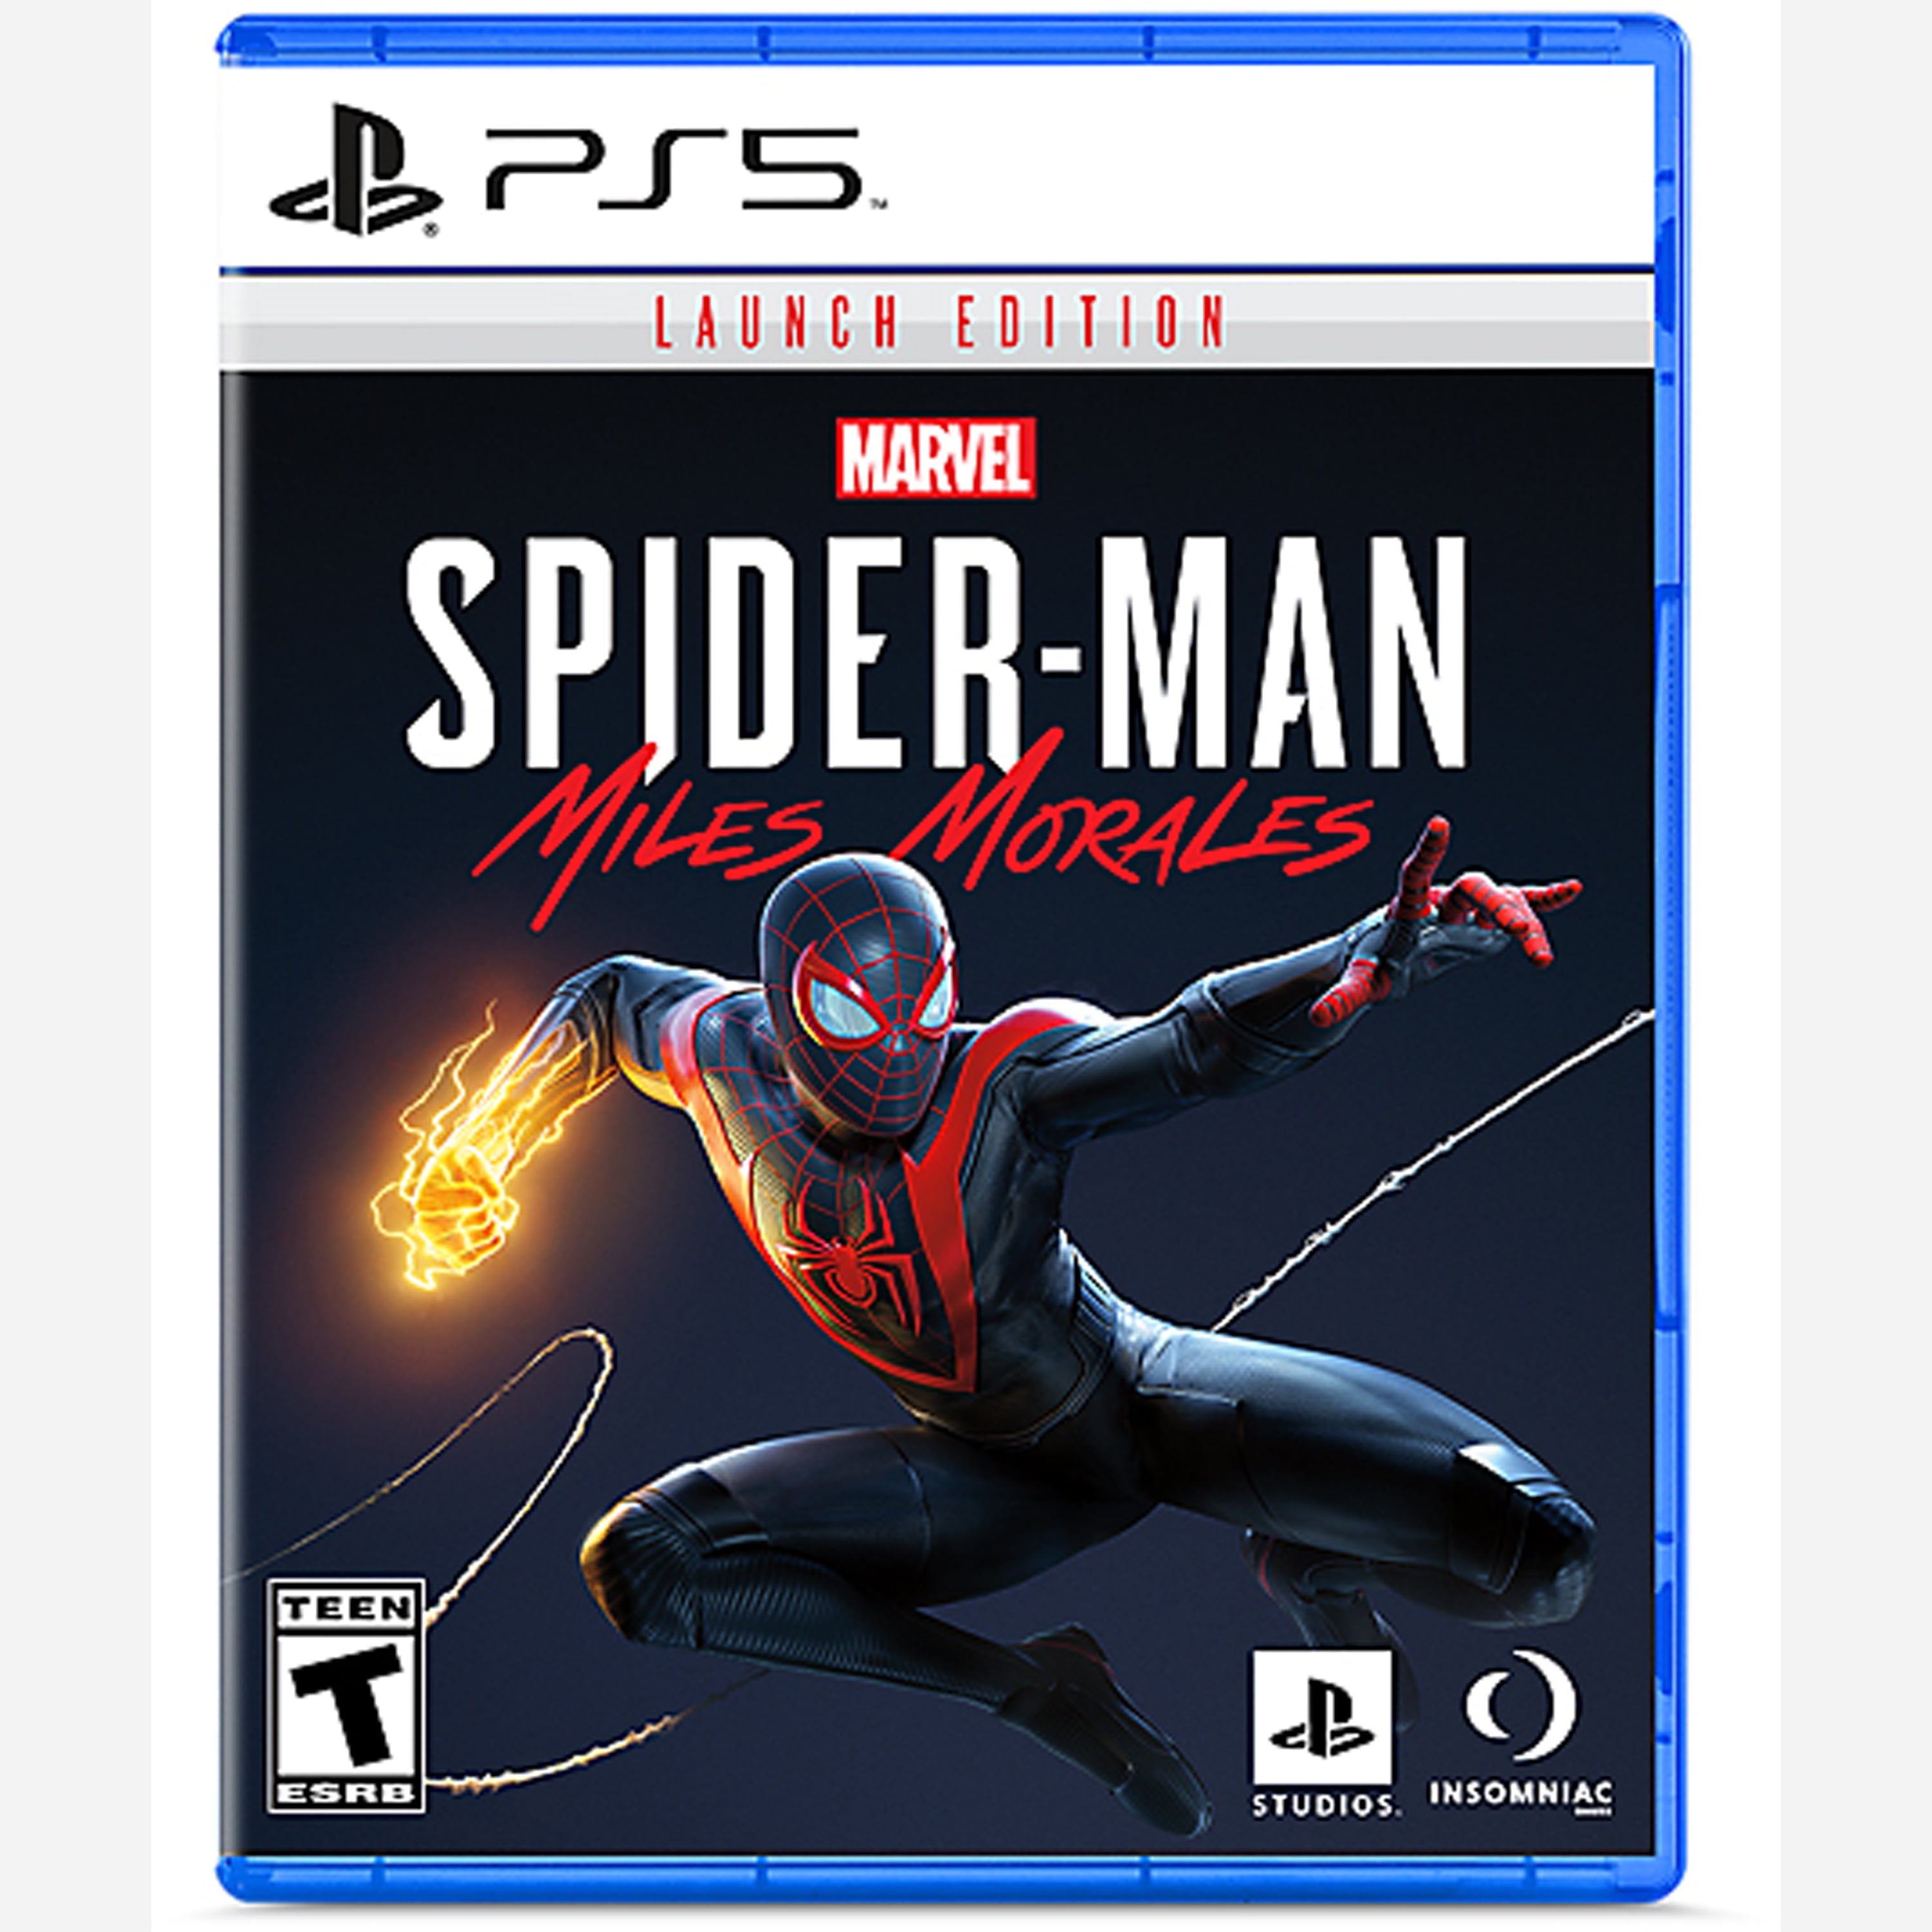 CONSOLA PLAY STATION PS5 SLIM 1TB SSD 8K CFI-2015A SPIDERMAN 2 - Mapy